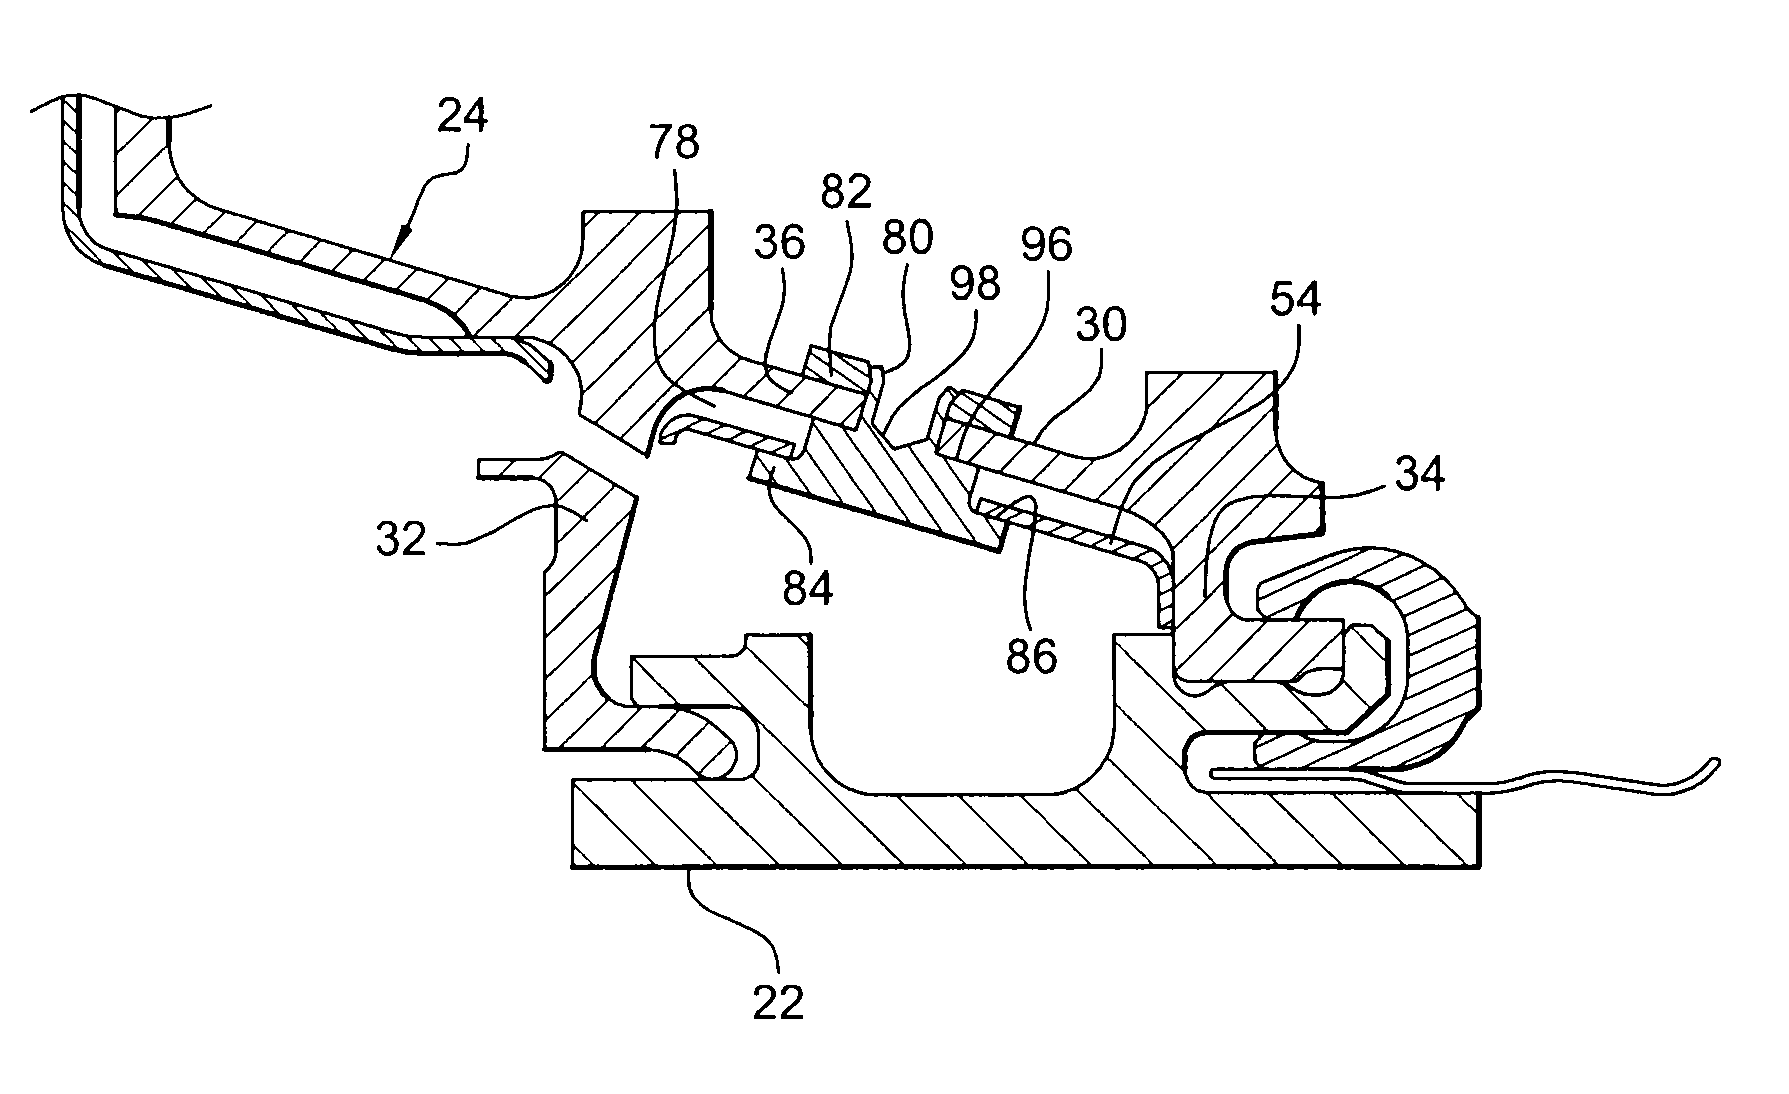 Control of clearance at blade tips in a high-pressure turbine of a turbine engine